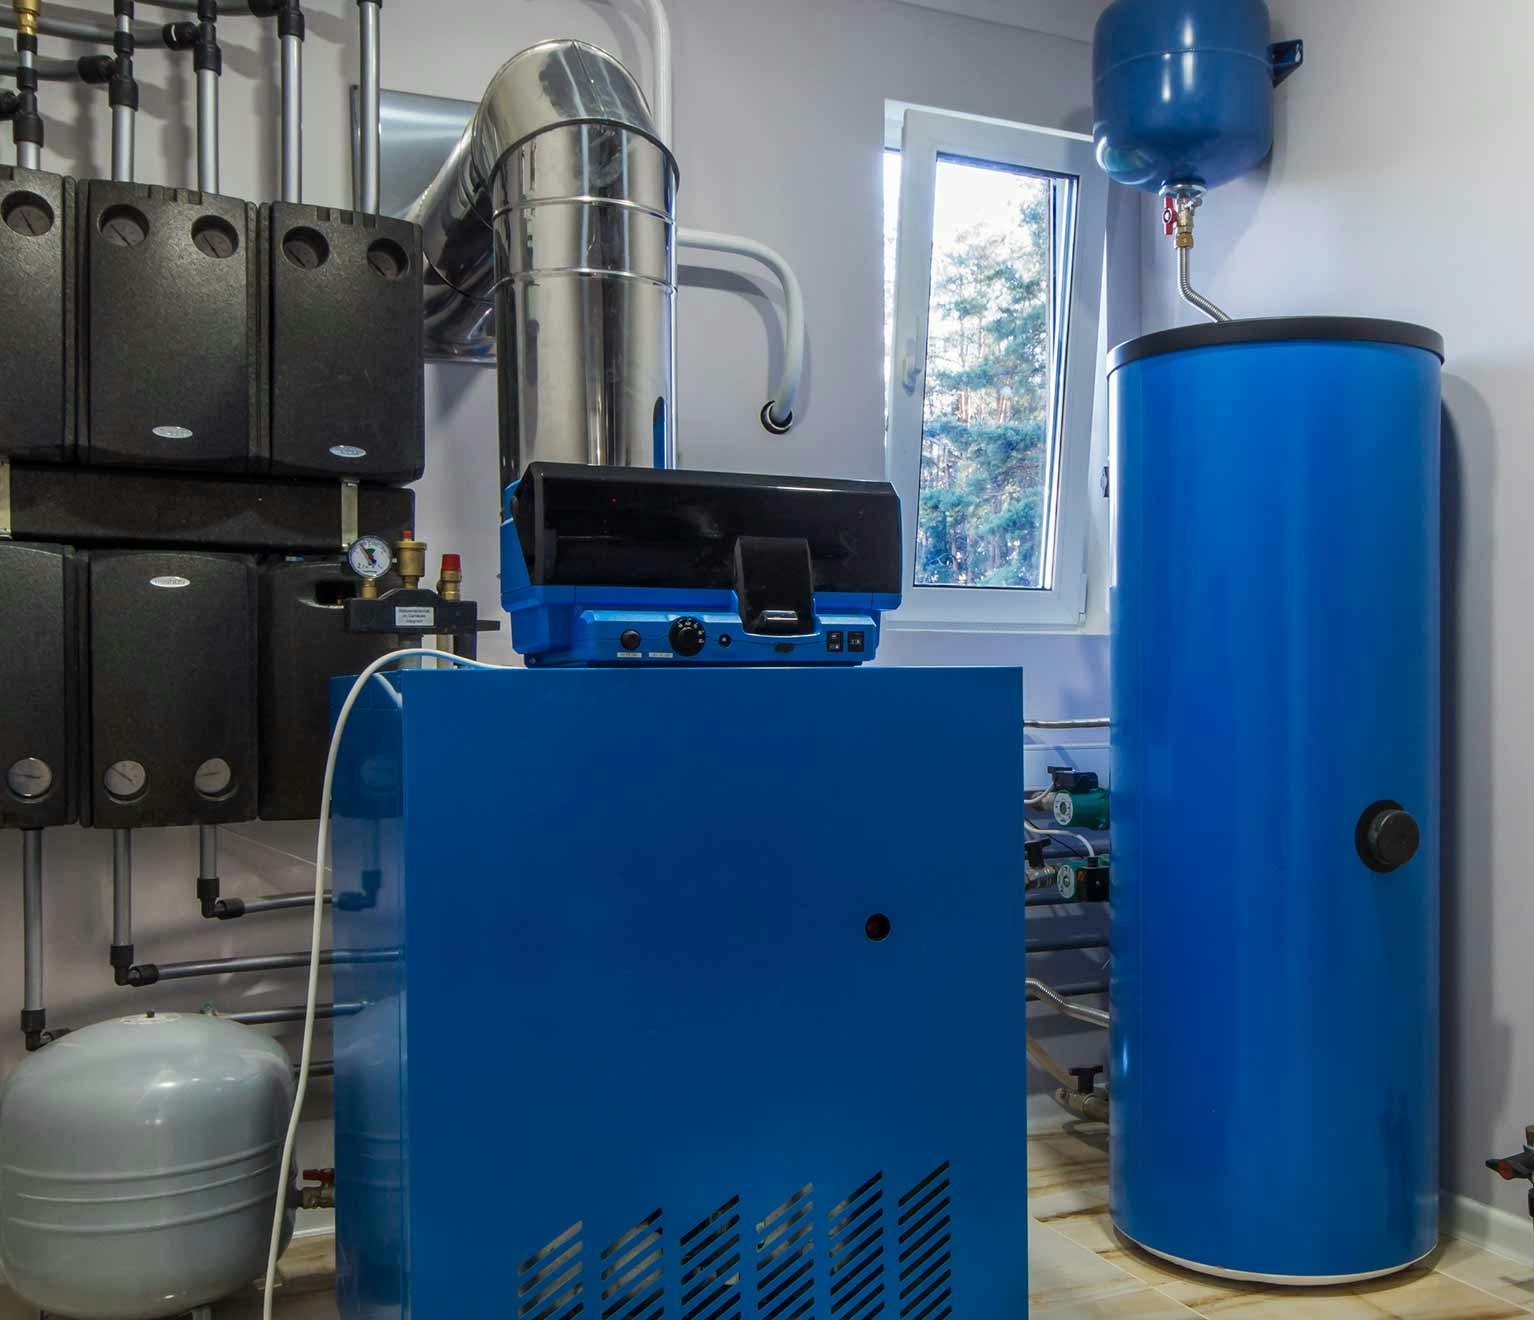 Image of a boiler room in a modern home.